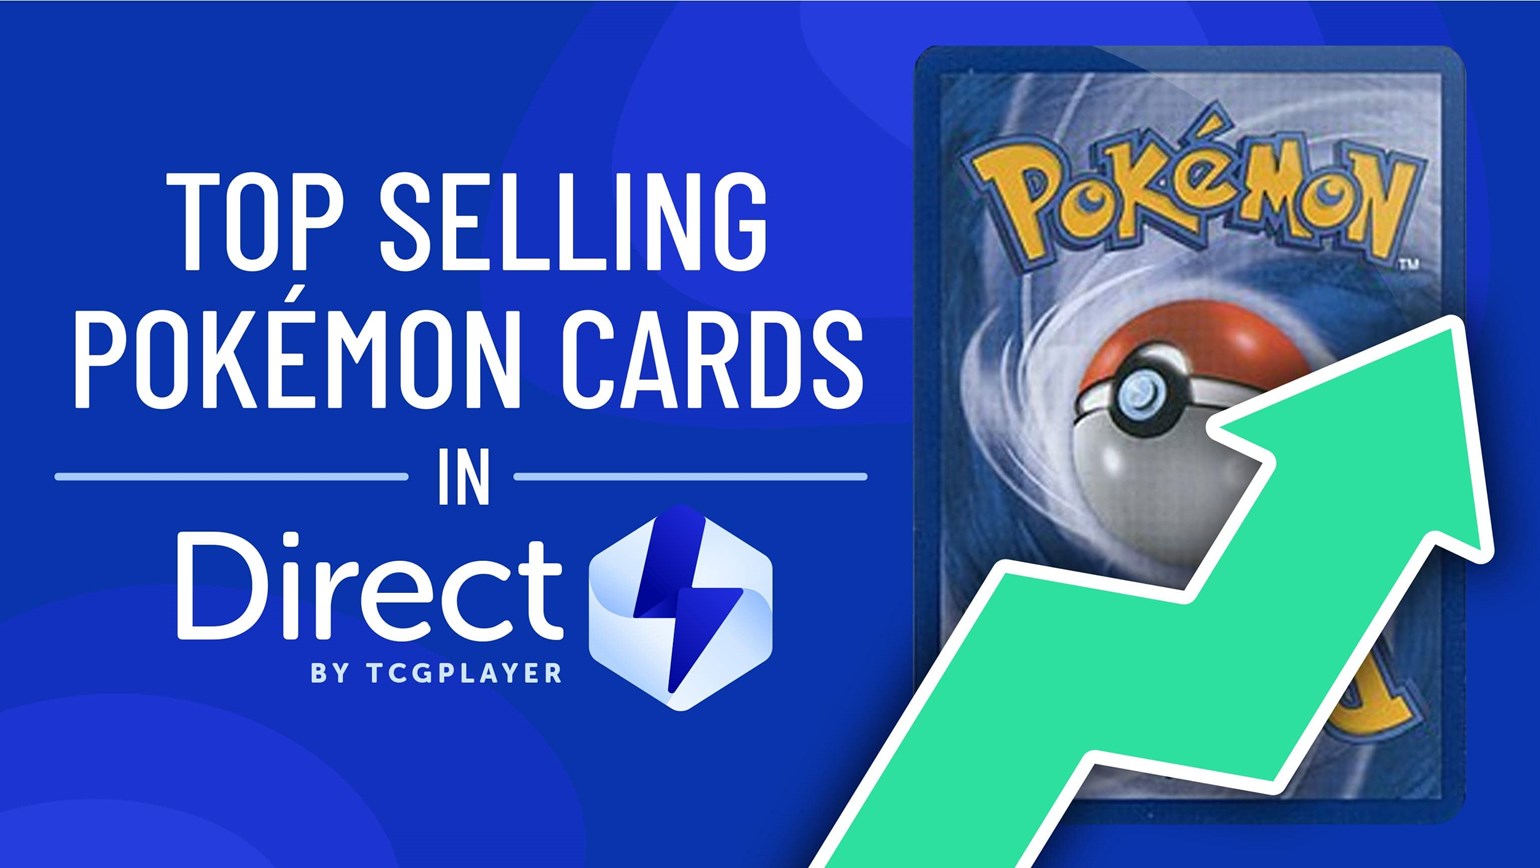 November Top Selling Pokémon Cards in Direct by TCGplayer